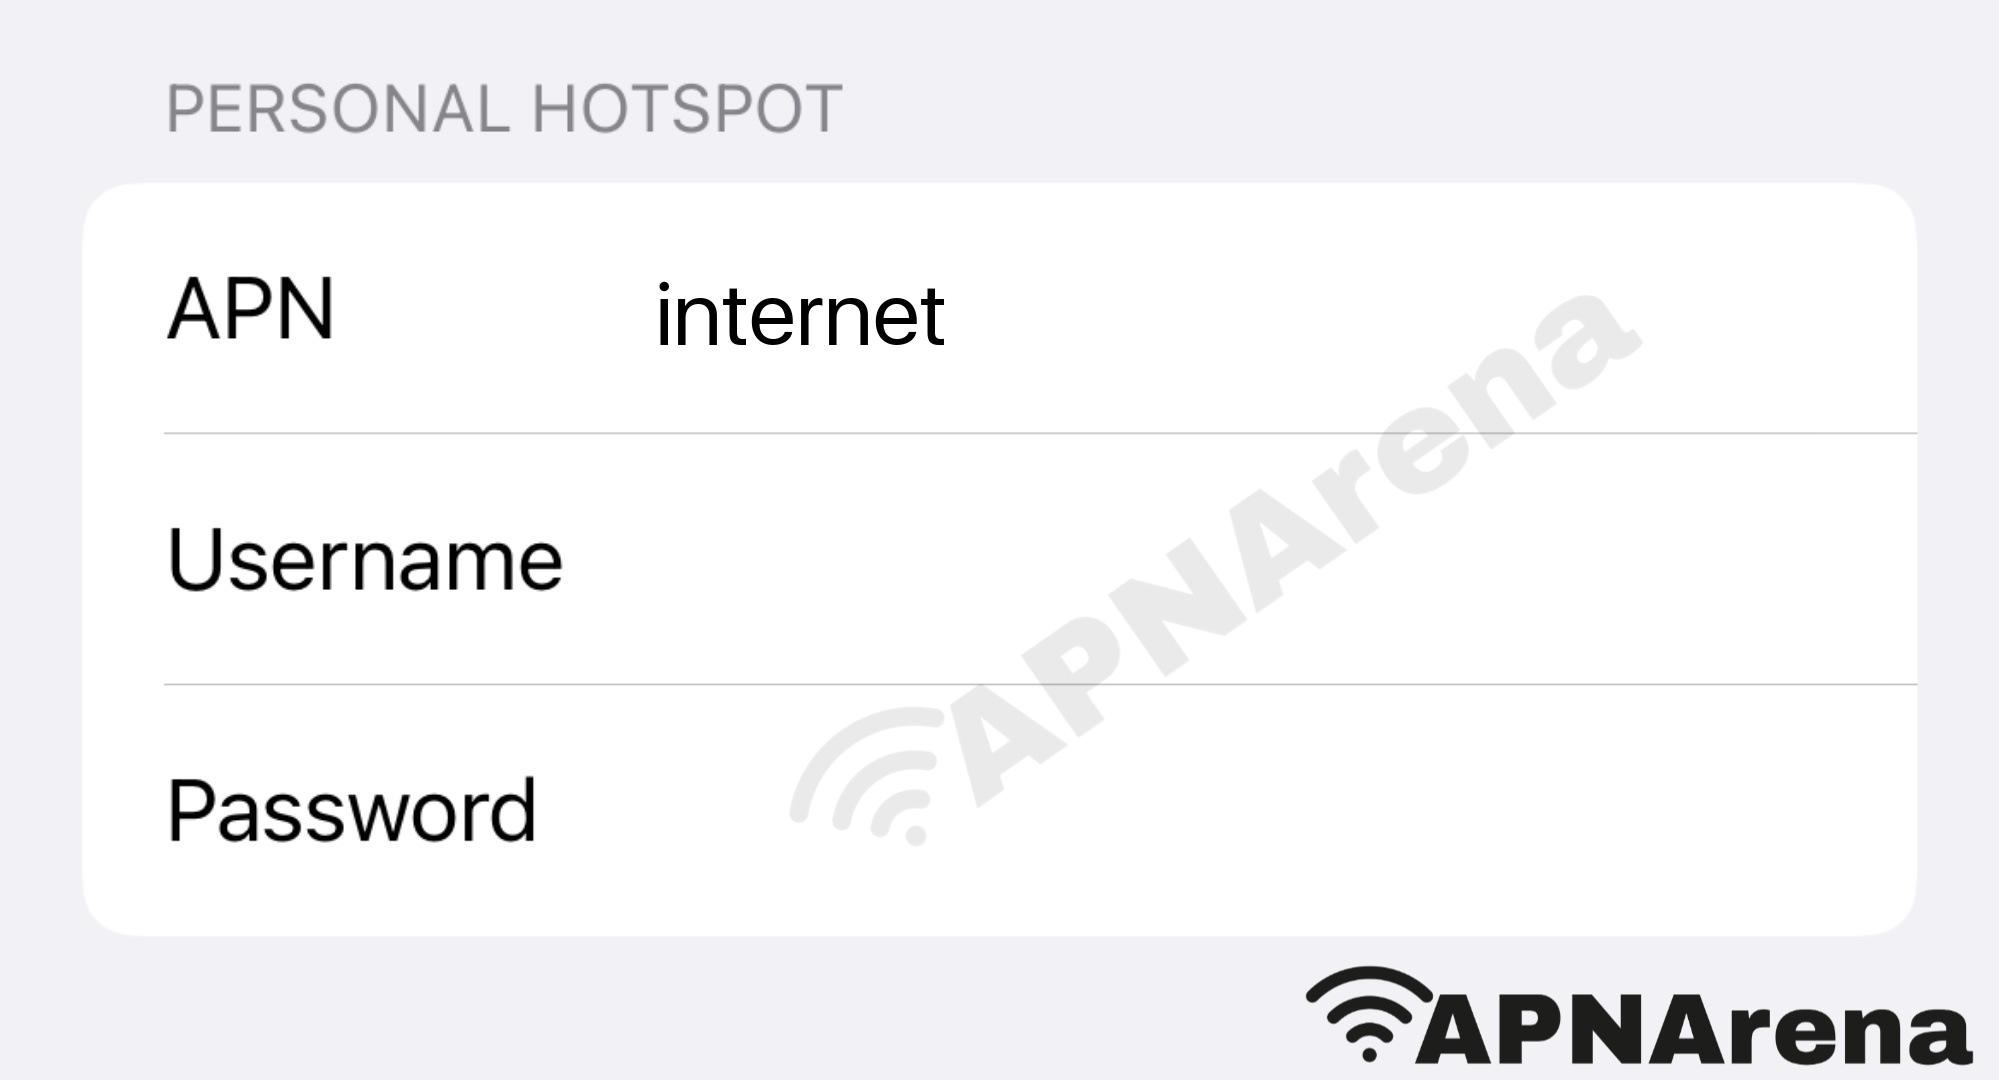 A1 Serbia (Vip mobile) Personal Hotspot Settings for iPhone